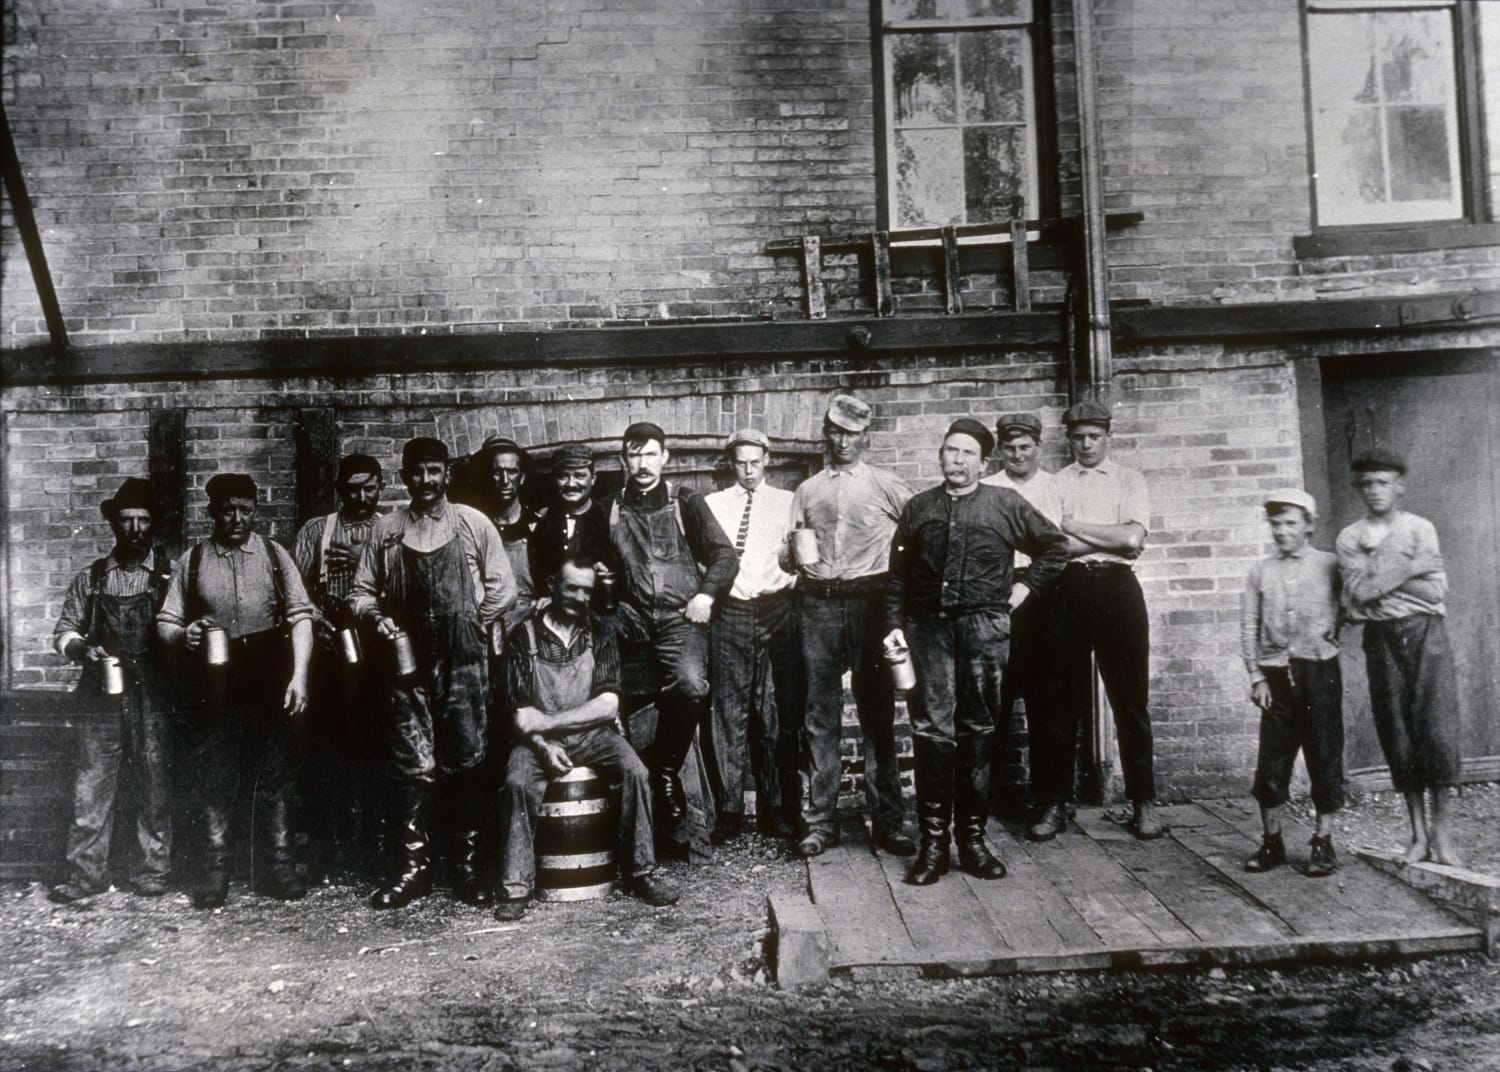 Wisconsin brewery workers pose for a photo in 1890